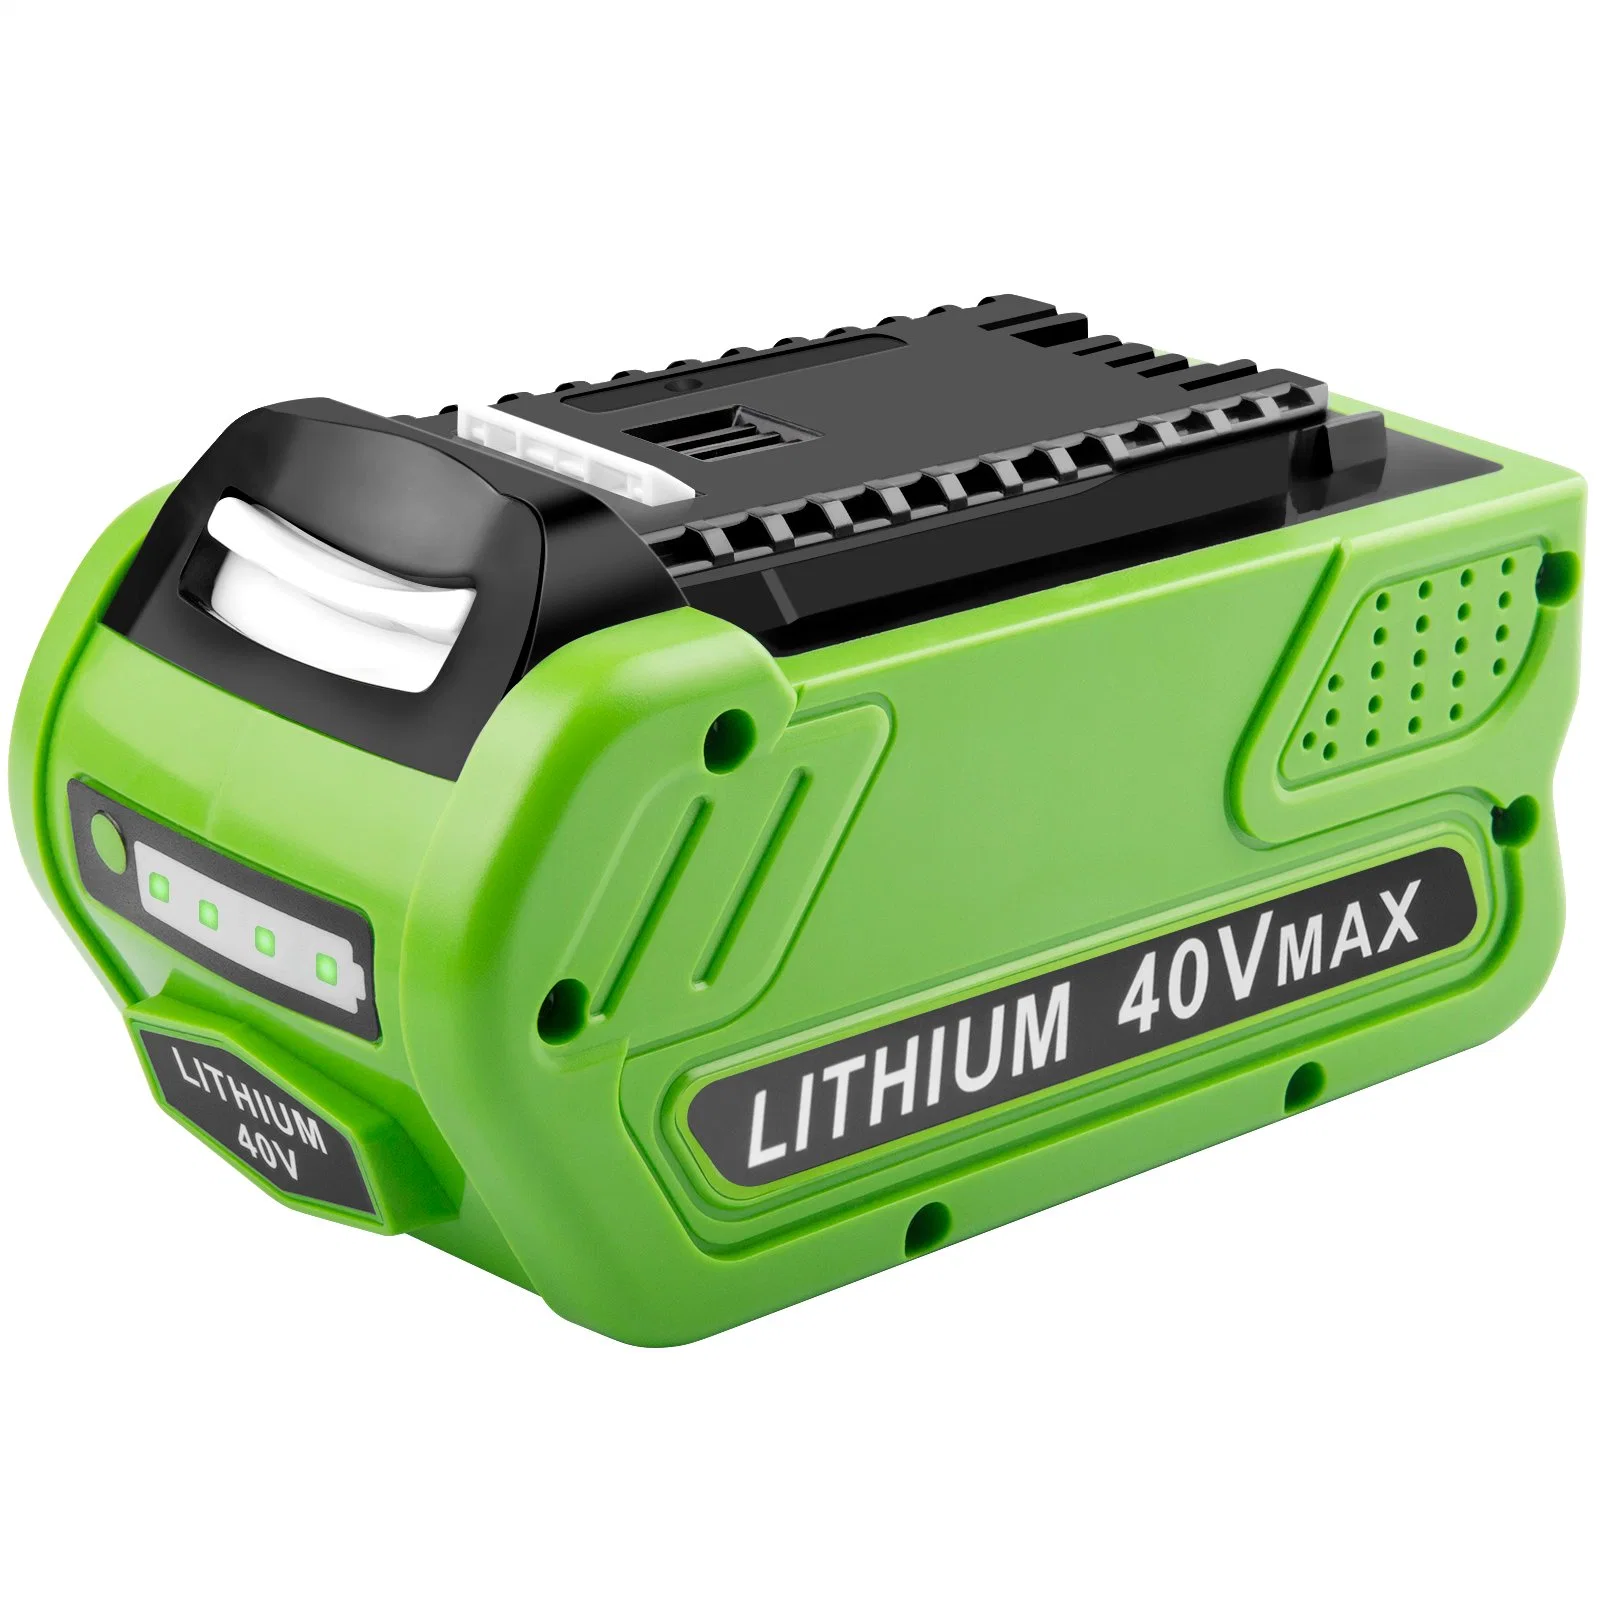 Rechargeable Lithium-Ion Battery 40V 7.0ah Gw29472 for Greenworks Replacement Tool Power